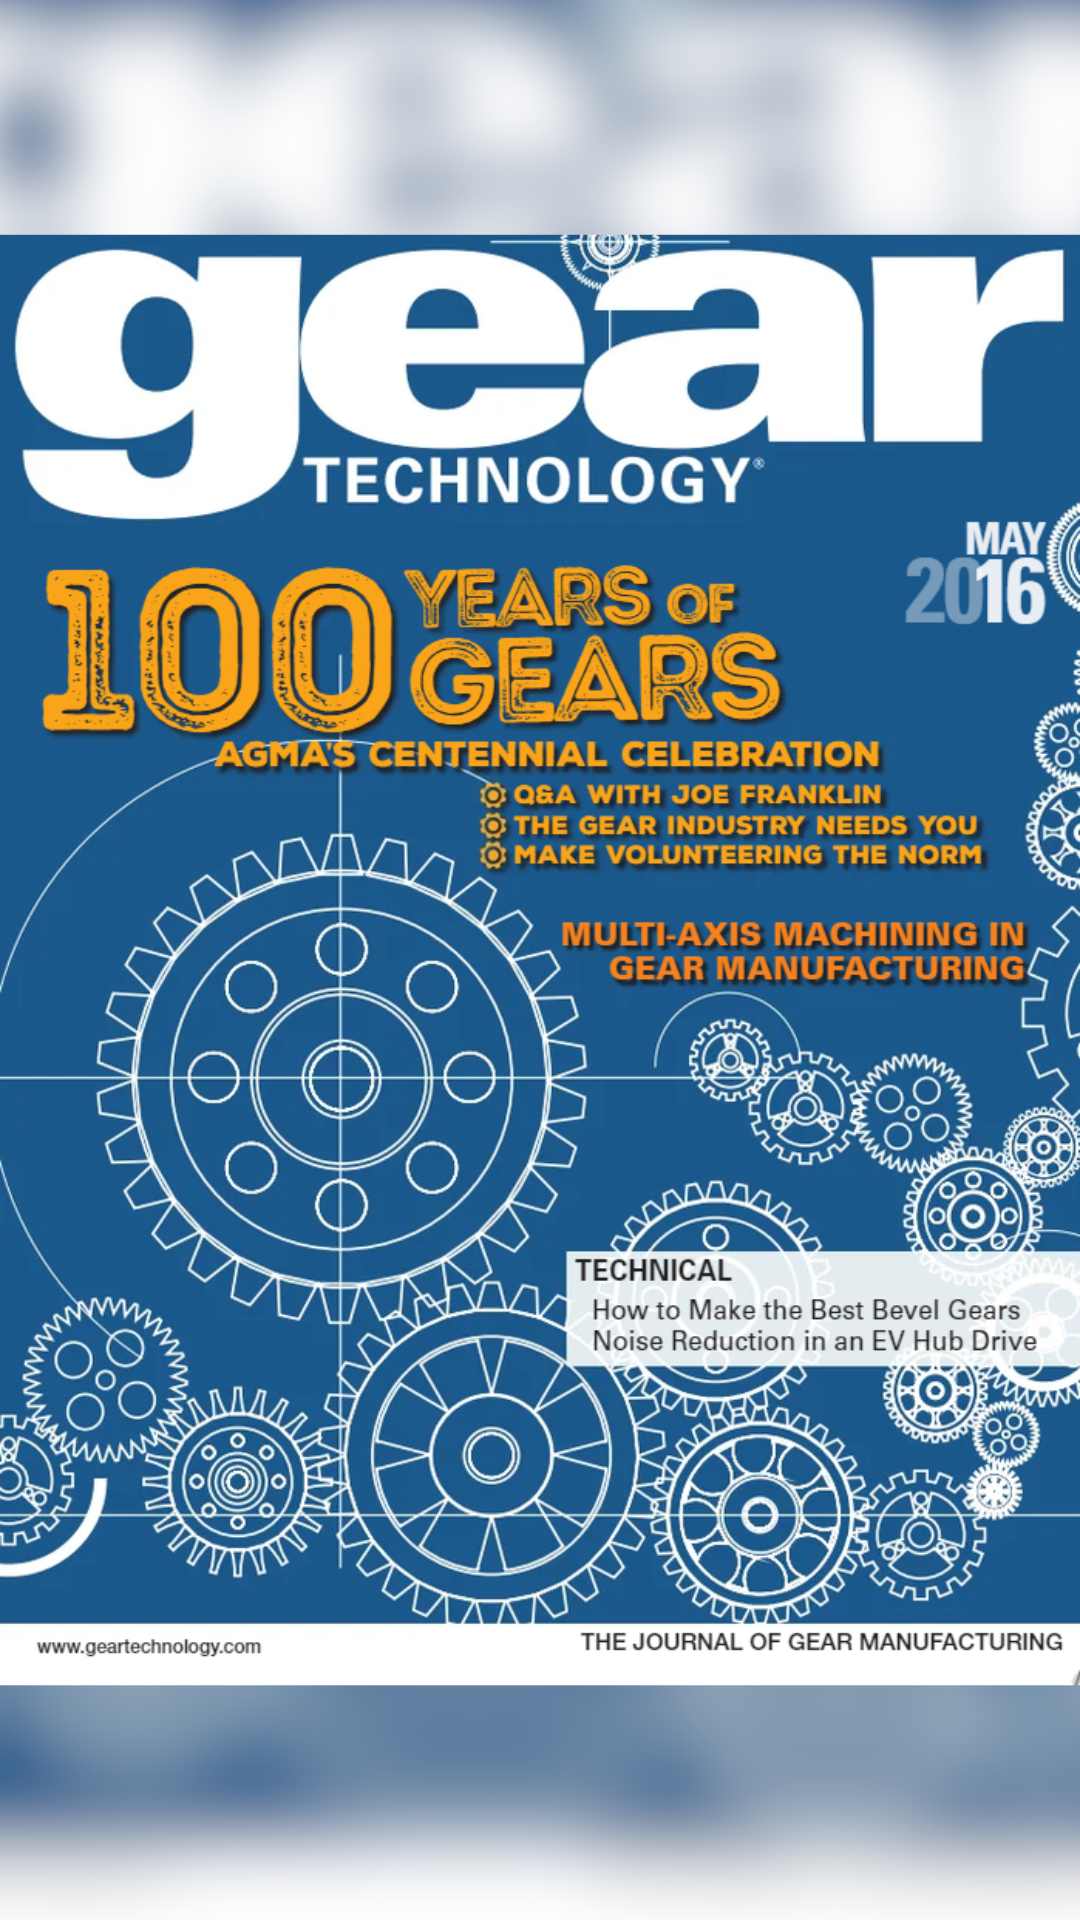 Gear Technology Magazine May 2016 front cover '100 years of gears'.